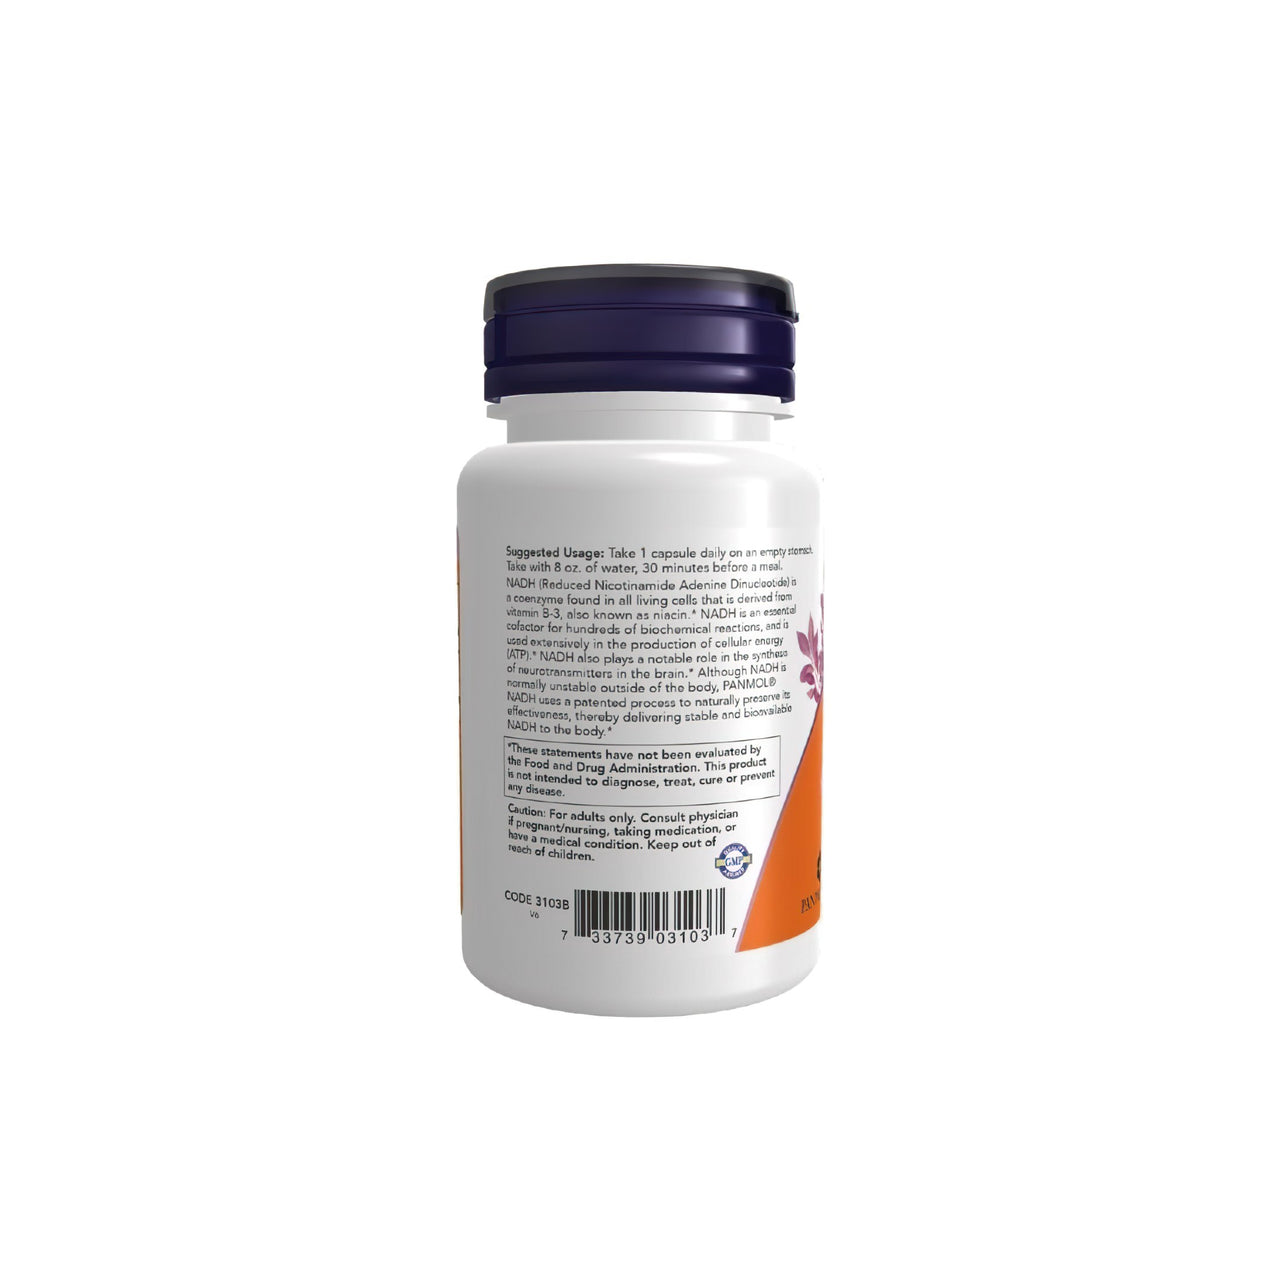 A bottle of Now Foods NADH 10 mg 60 Vegetable Capsules, known for its immune system benefits, on a white background.